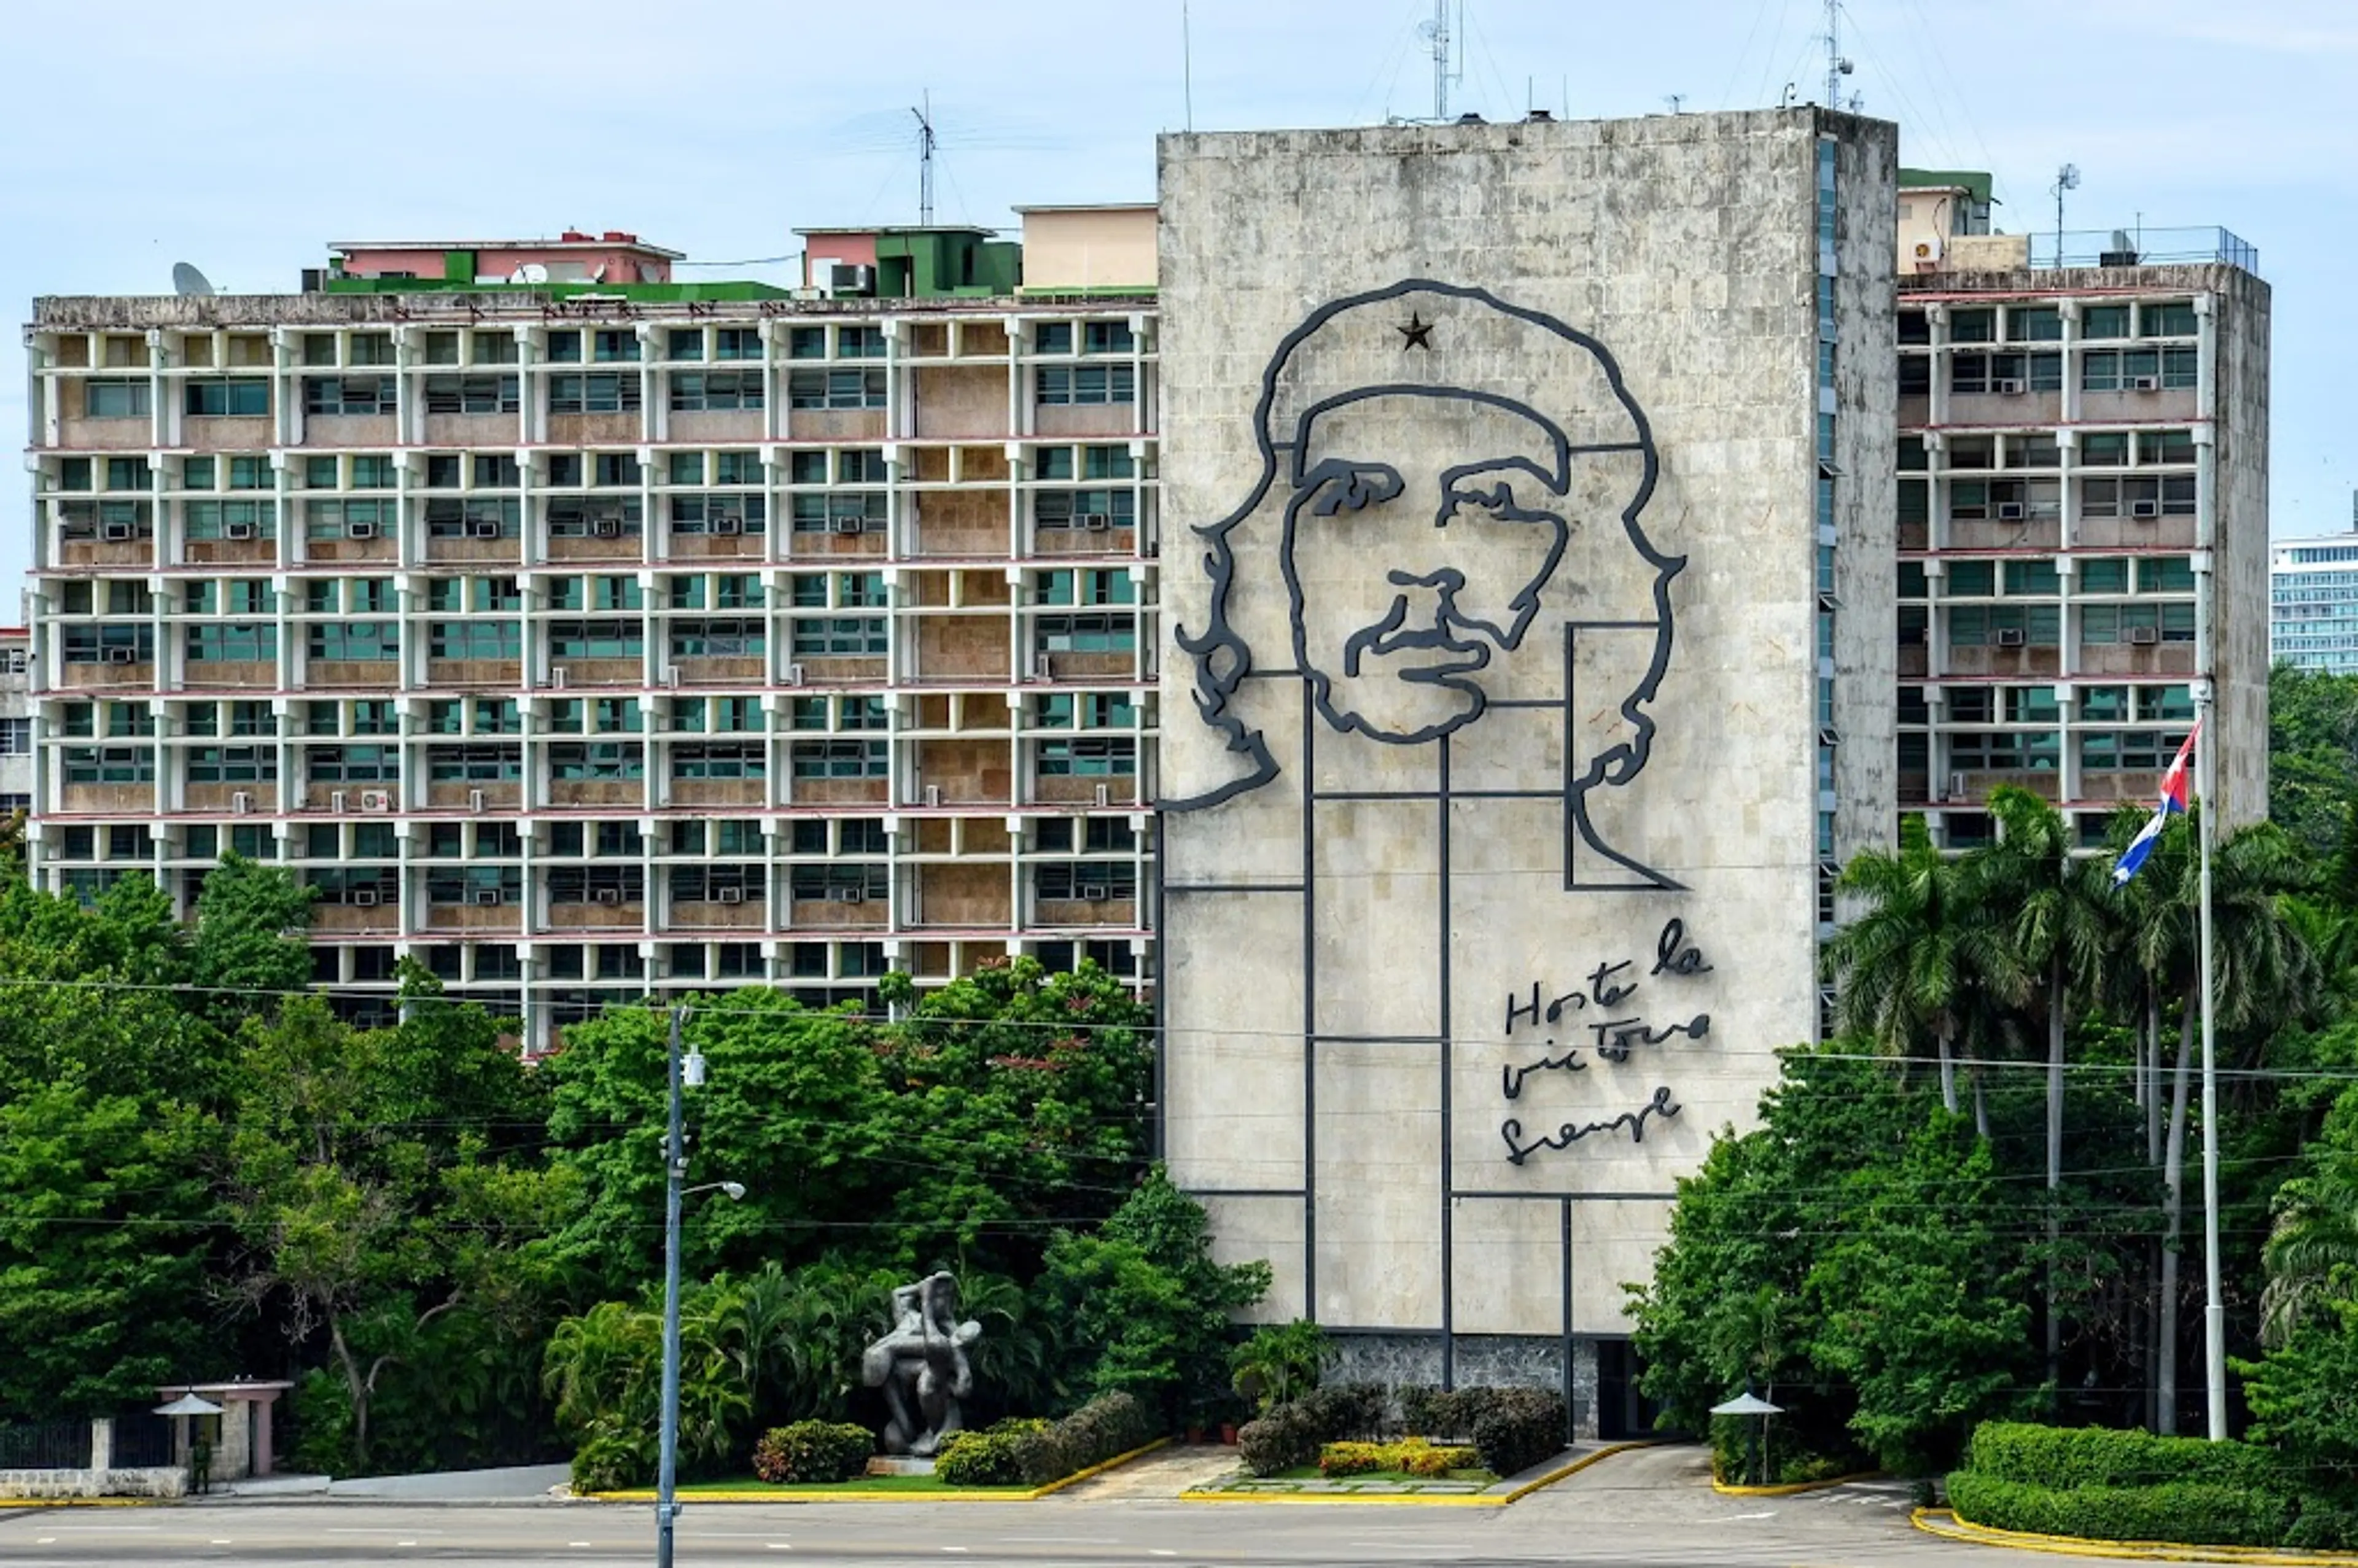 Che Guevara image on the Ministry of Interior building